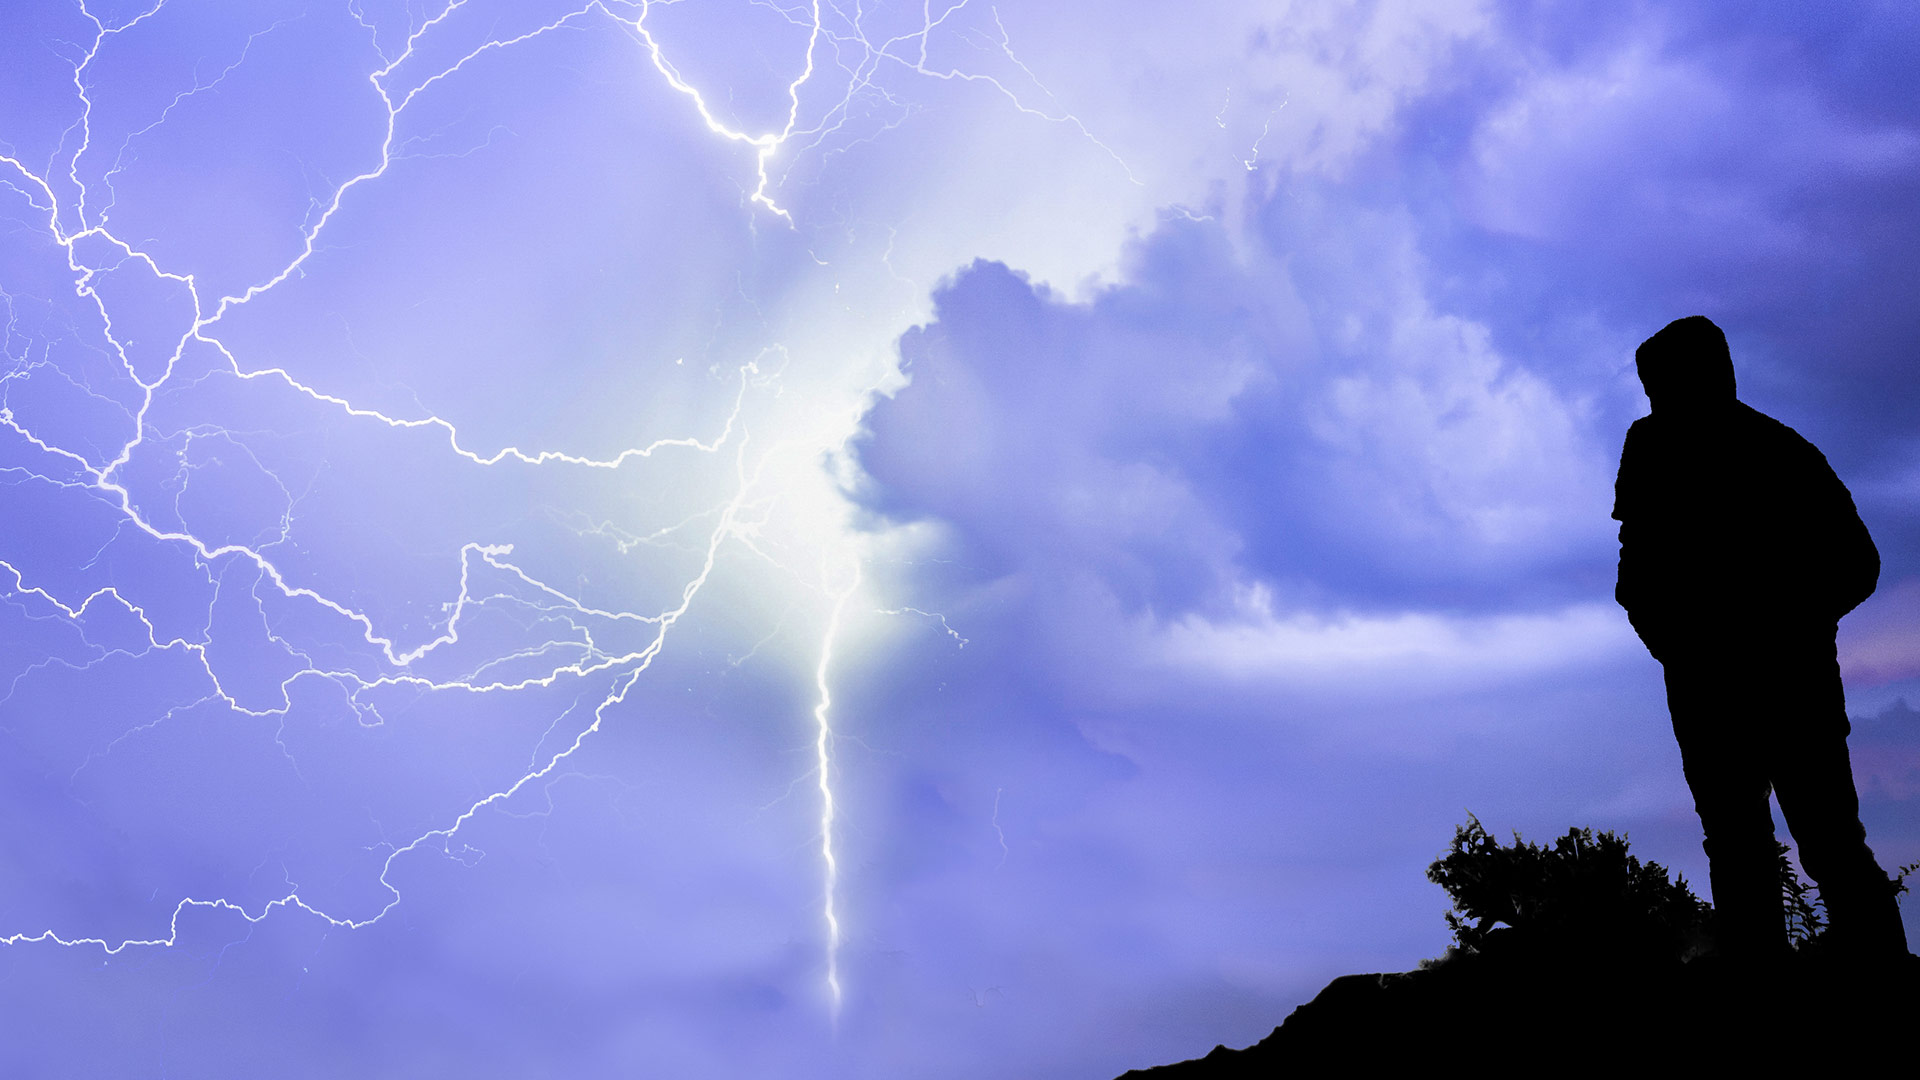 Daily Dose - What Happens To the Human Body When it's Struck by Lightning?